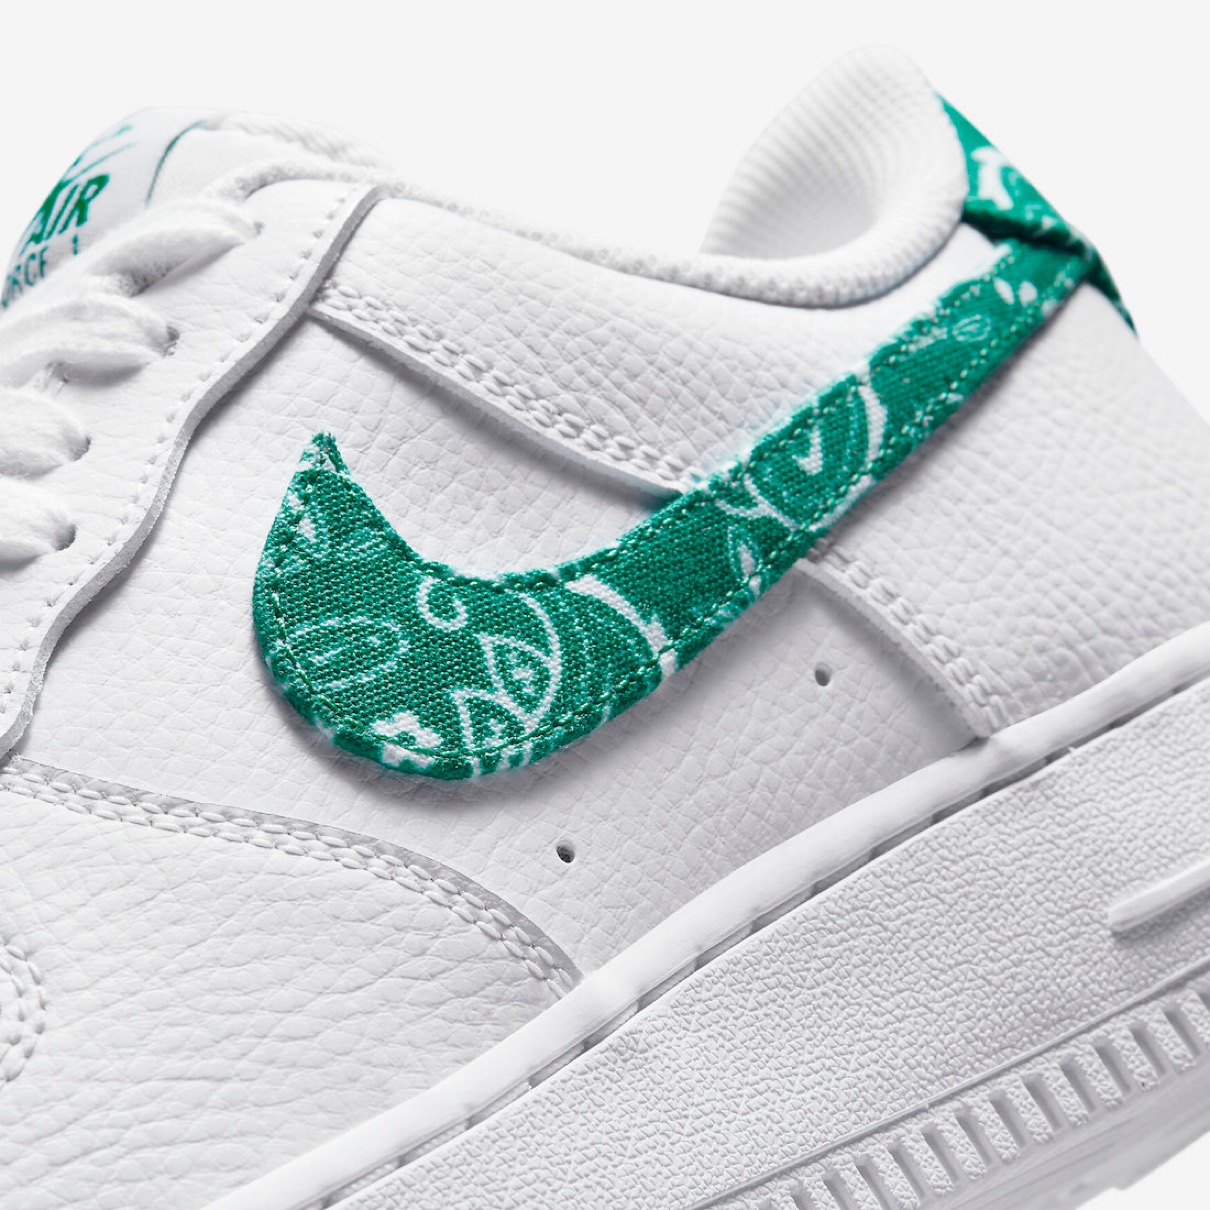 Nike Wmns Air Force 1 '07 Essential “Green Paisley”が国内1月20日/1